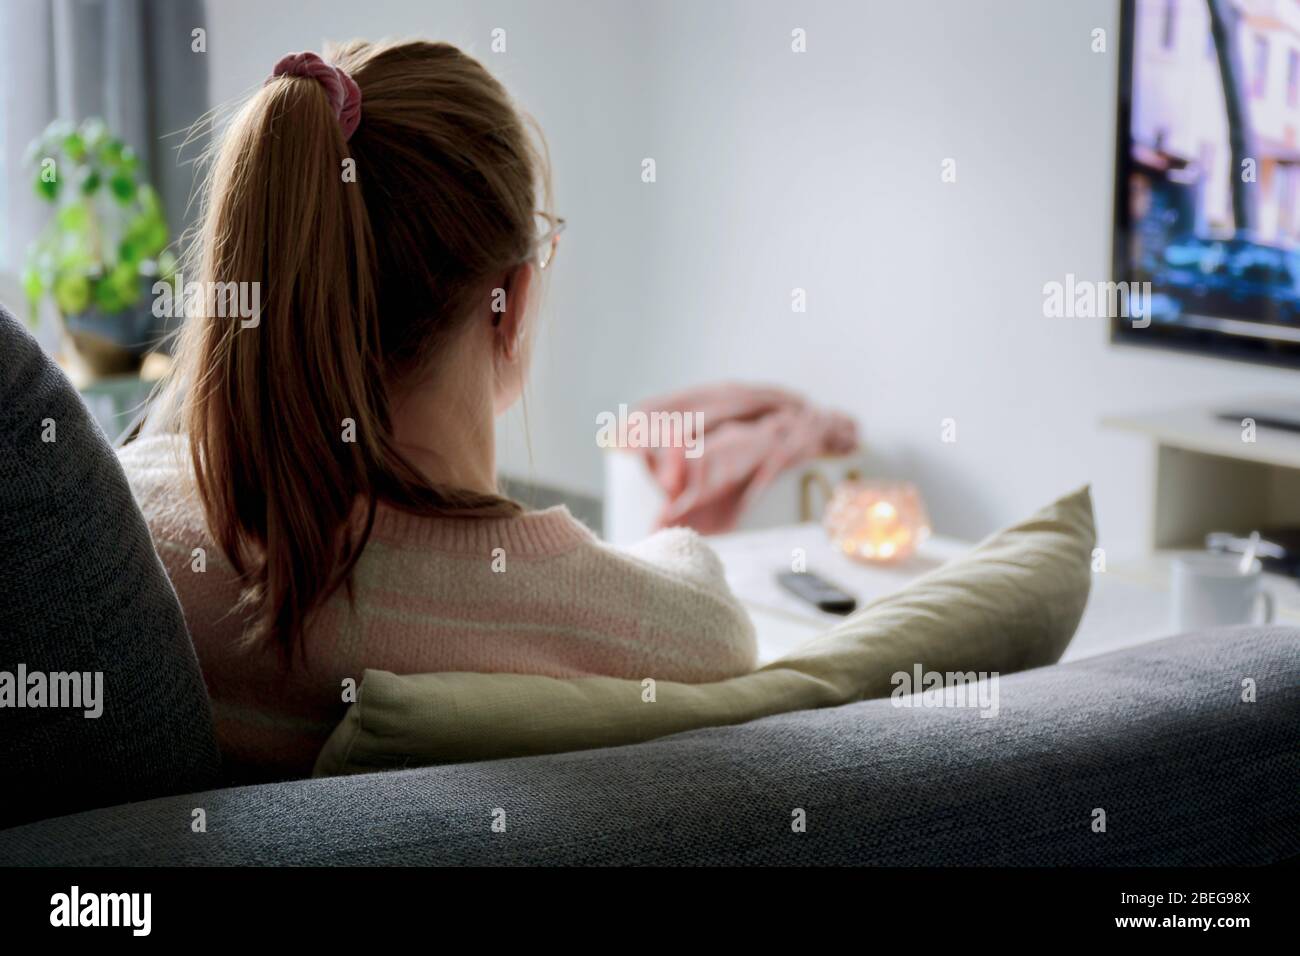 A young woman from behind with ponytail and glasses watching TV while sitting on sofa in living room at home. Binge watching tv via online streaming Stock Photo